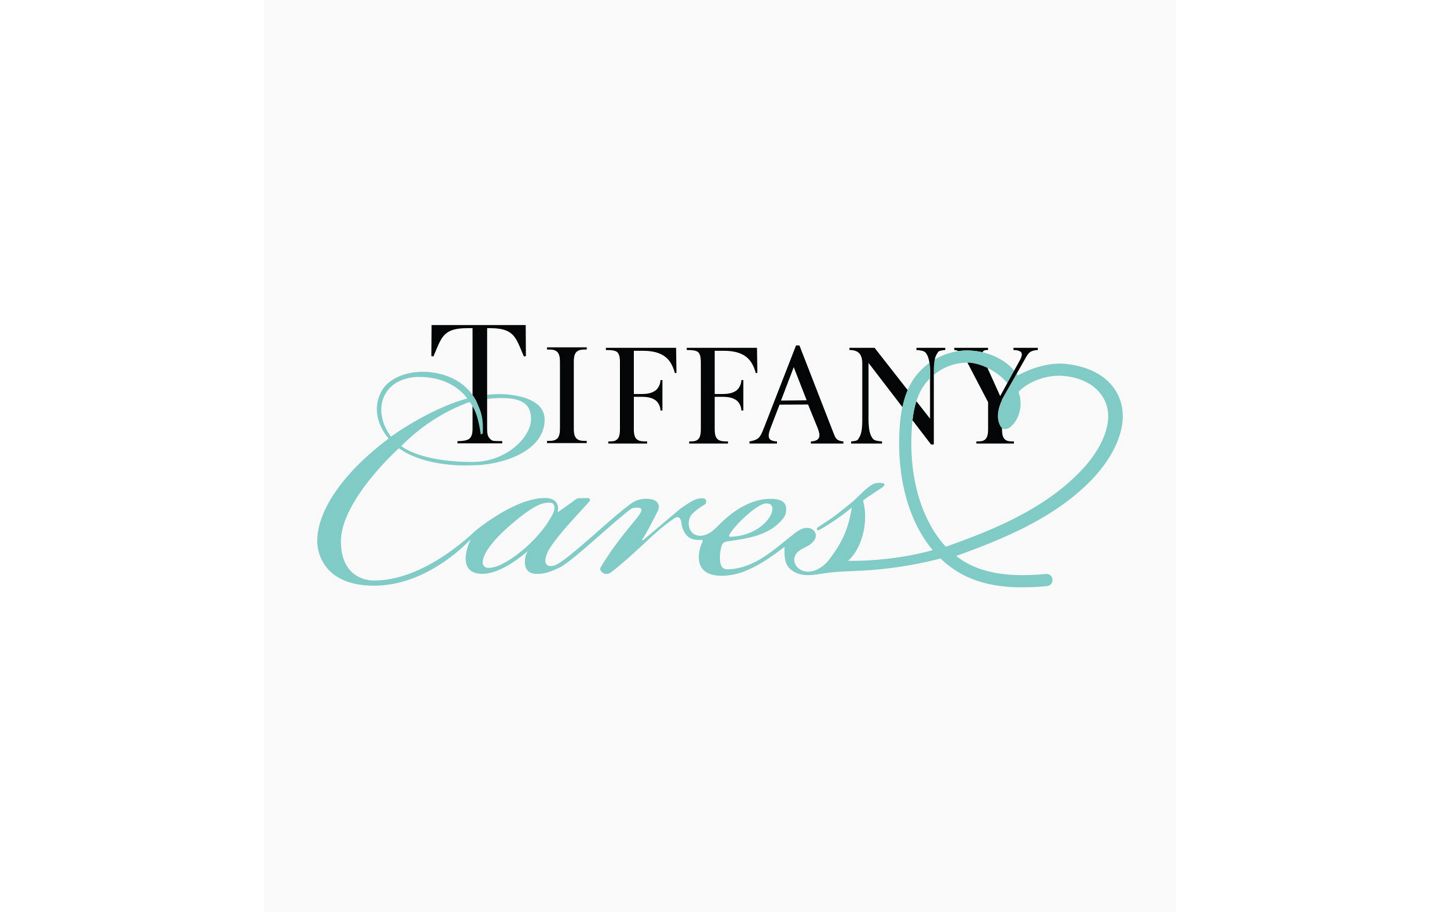 Working At Tiffany & Co.: Company Overview and Culture - Zippia